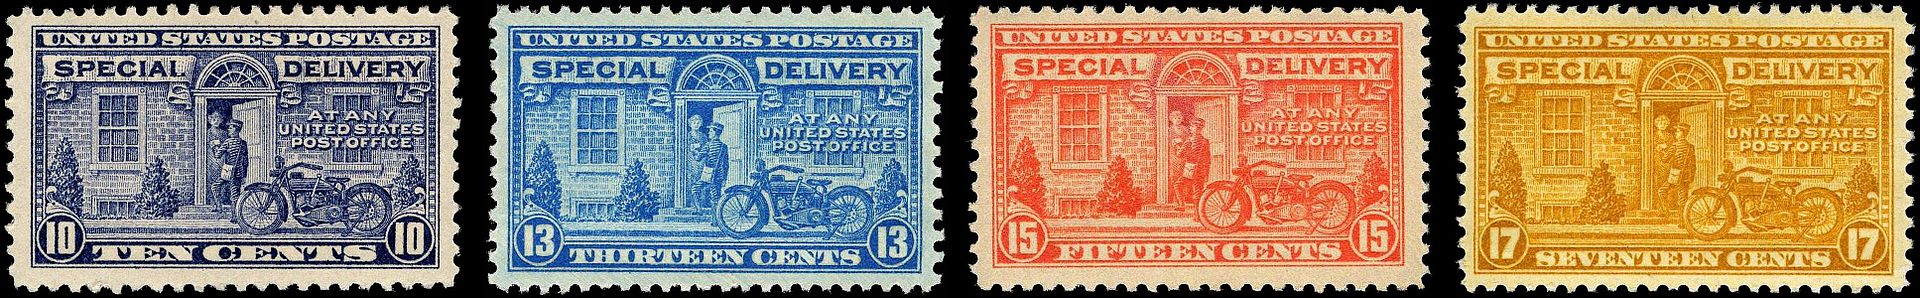 Special_Delivery_stamps_2